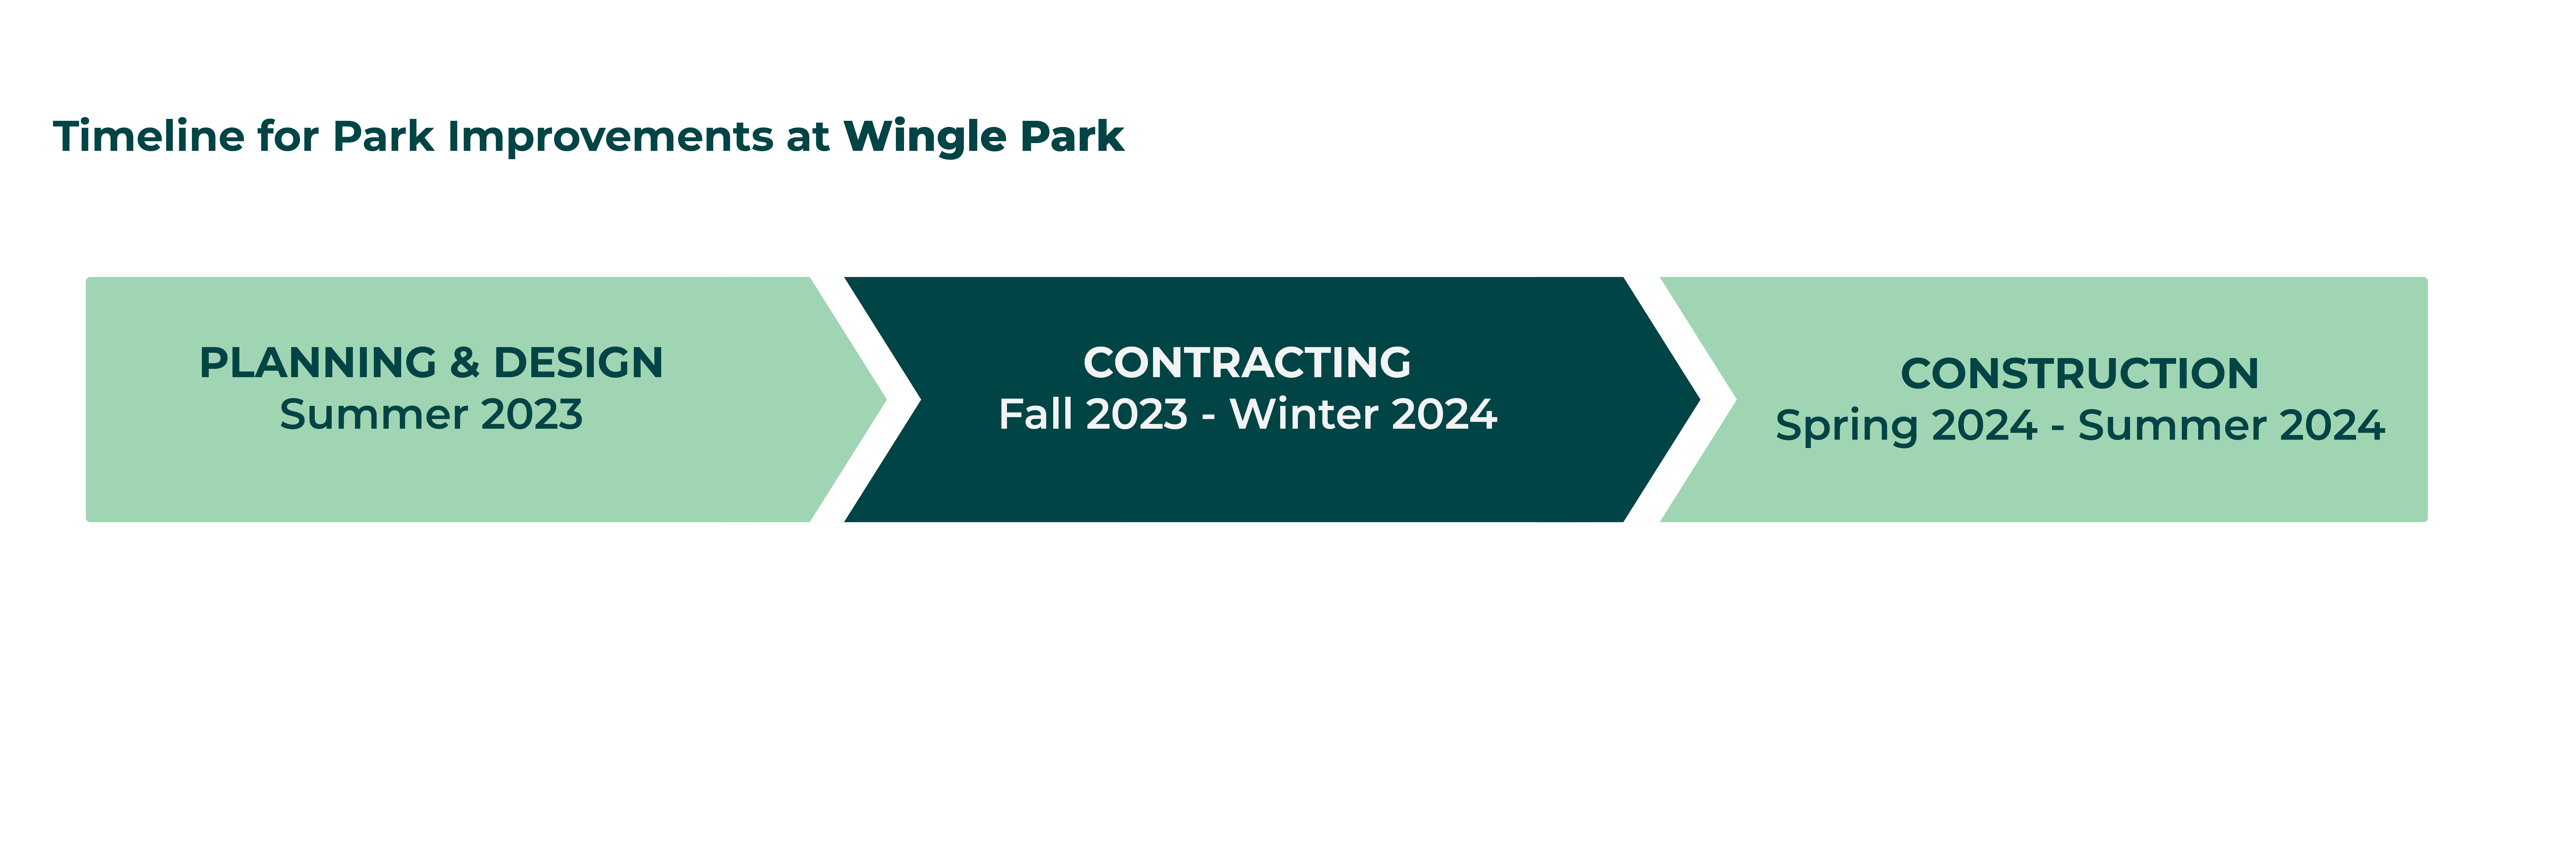 Timeline for Improvements to Wingle Park